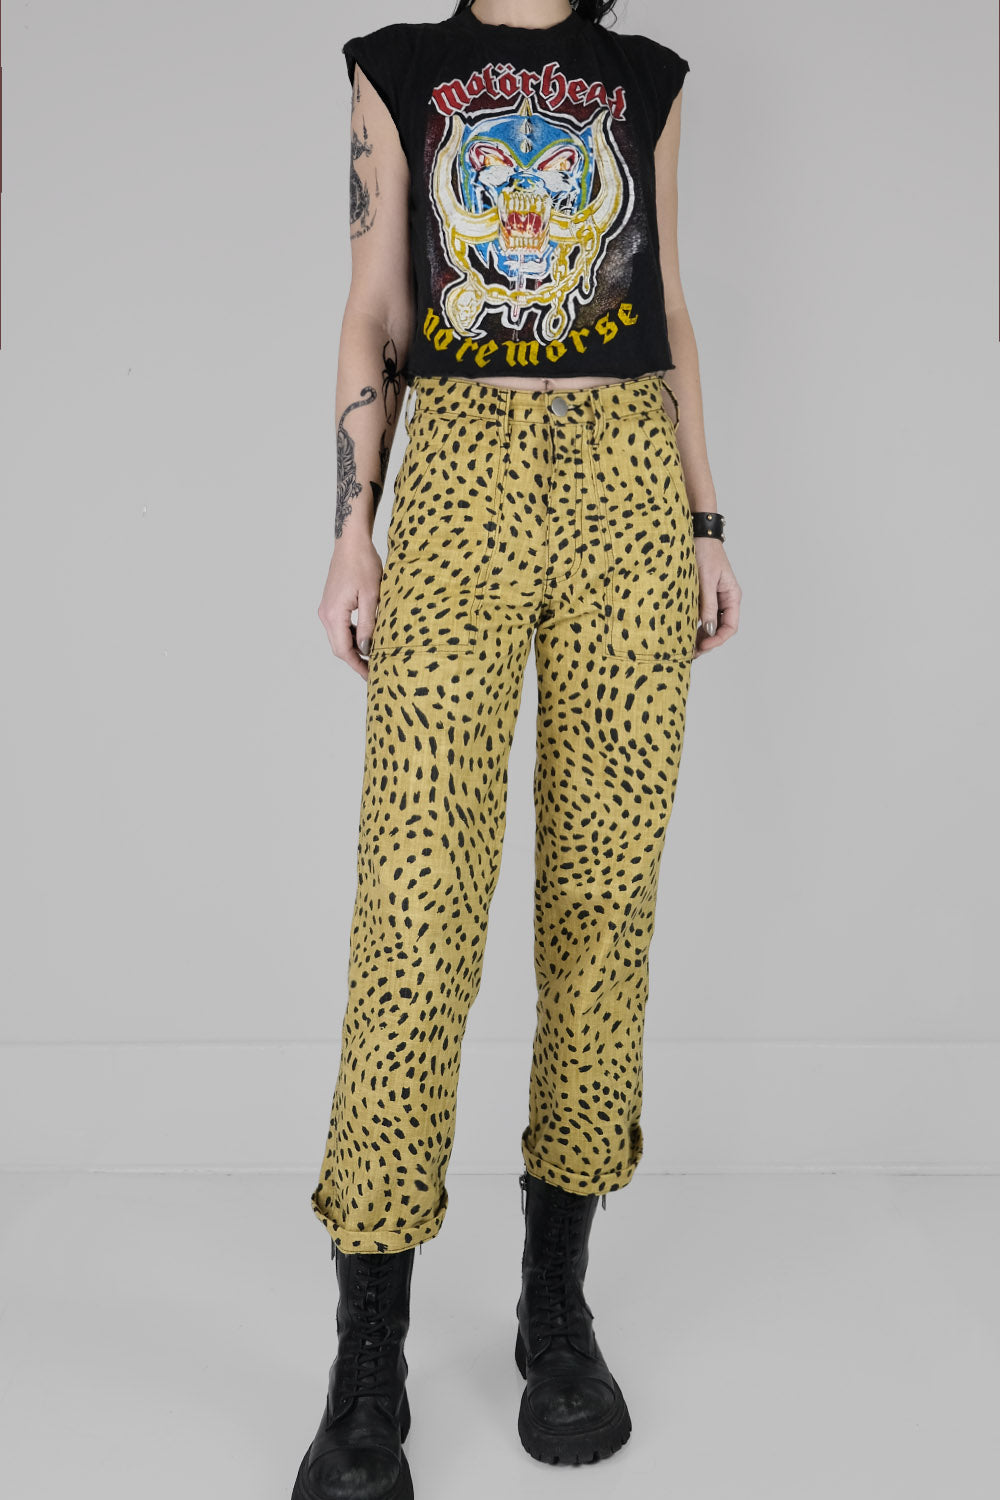 FLASH SALE! OG-107 Utility Pants in Cheetah Print | Made To Order (27 In Stock)